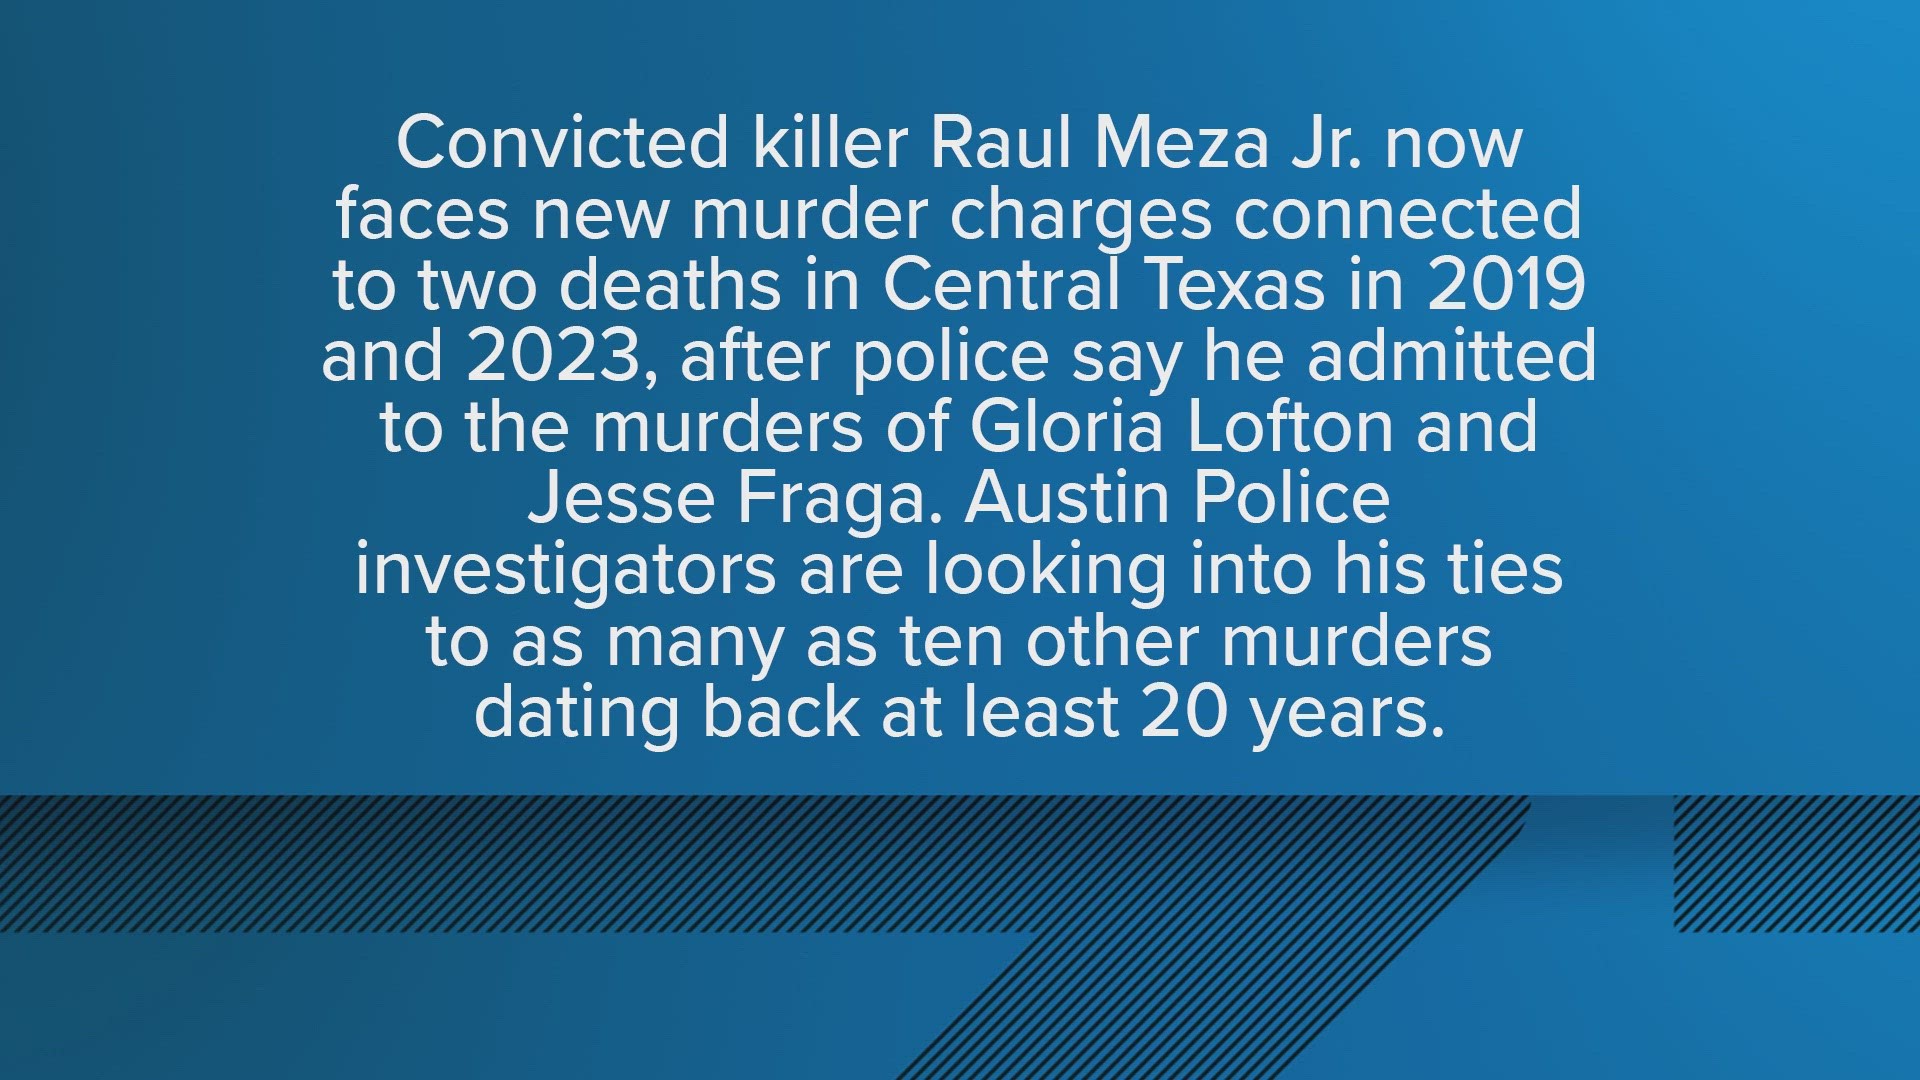 KVUE's Quita Culpepper spoke with Kendra's older sister, Shawn Page, about his little sister and what he hopes happens to Meza after his most recent arrest.